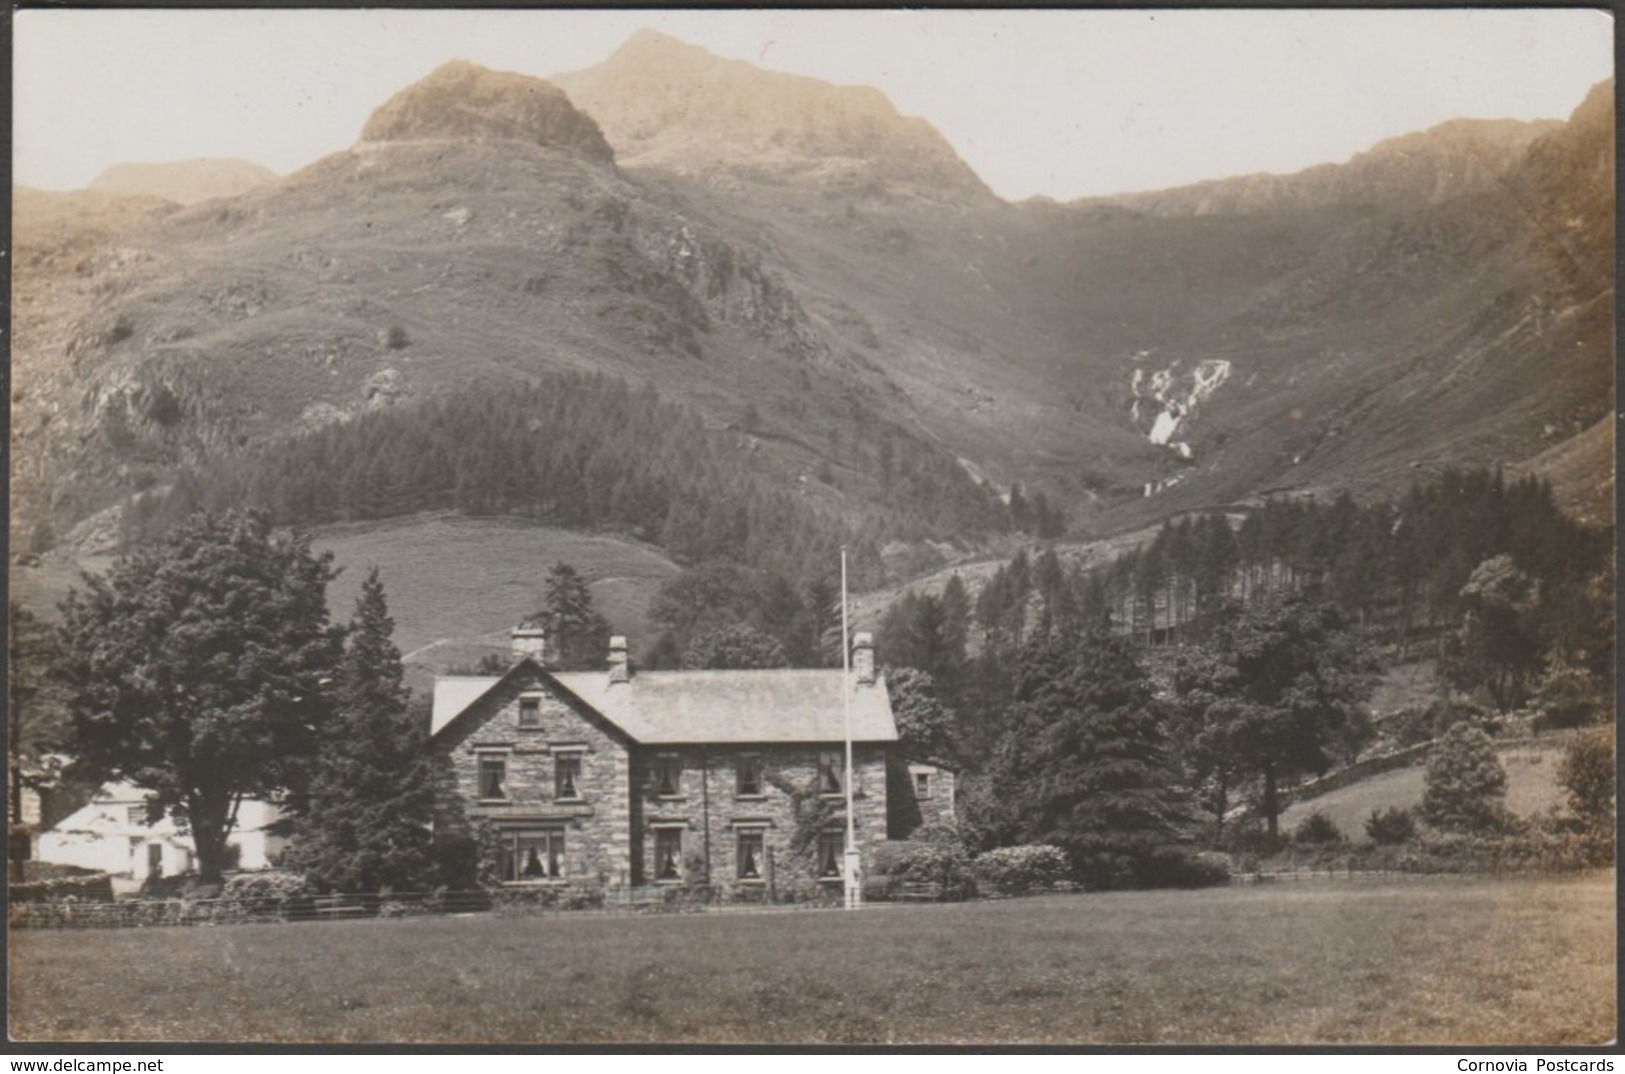 Dungeon Ghyll New Hotel, Ambleside, Westmorland, C.1940s - Abraham RP Postcard - Ambleside